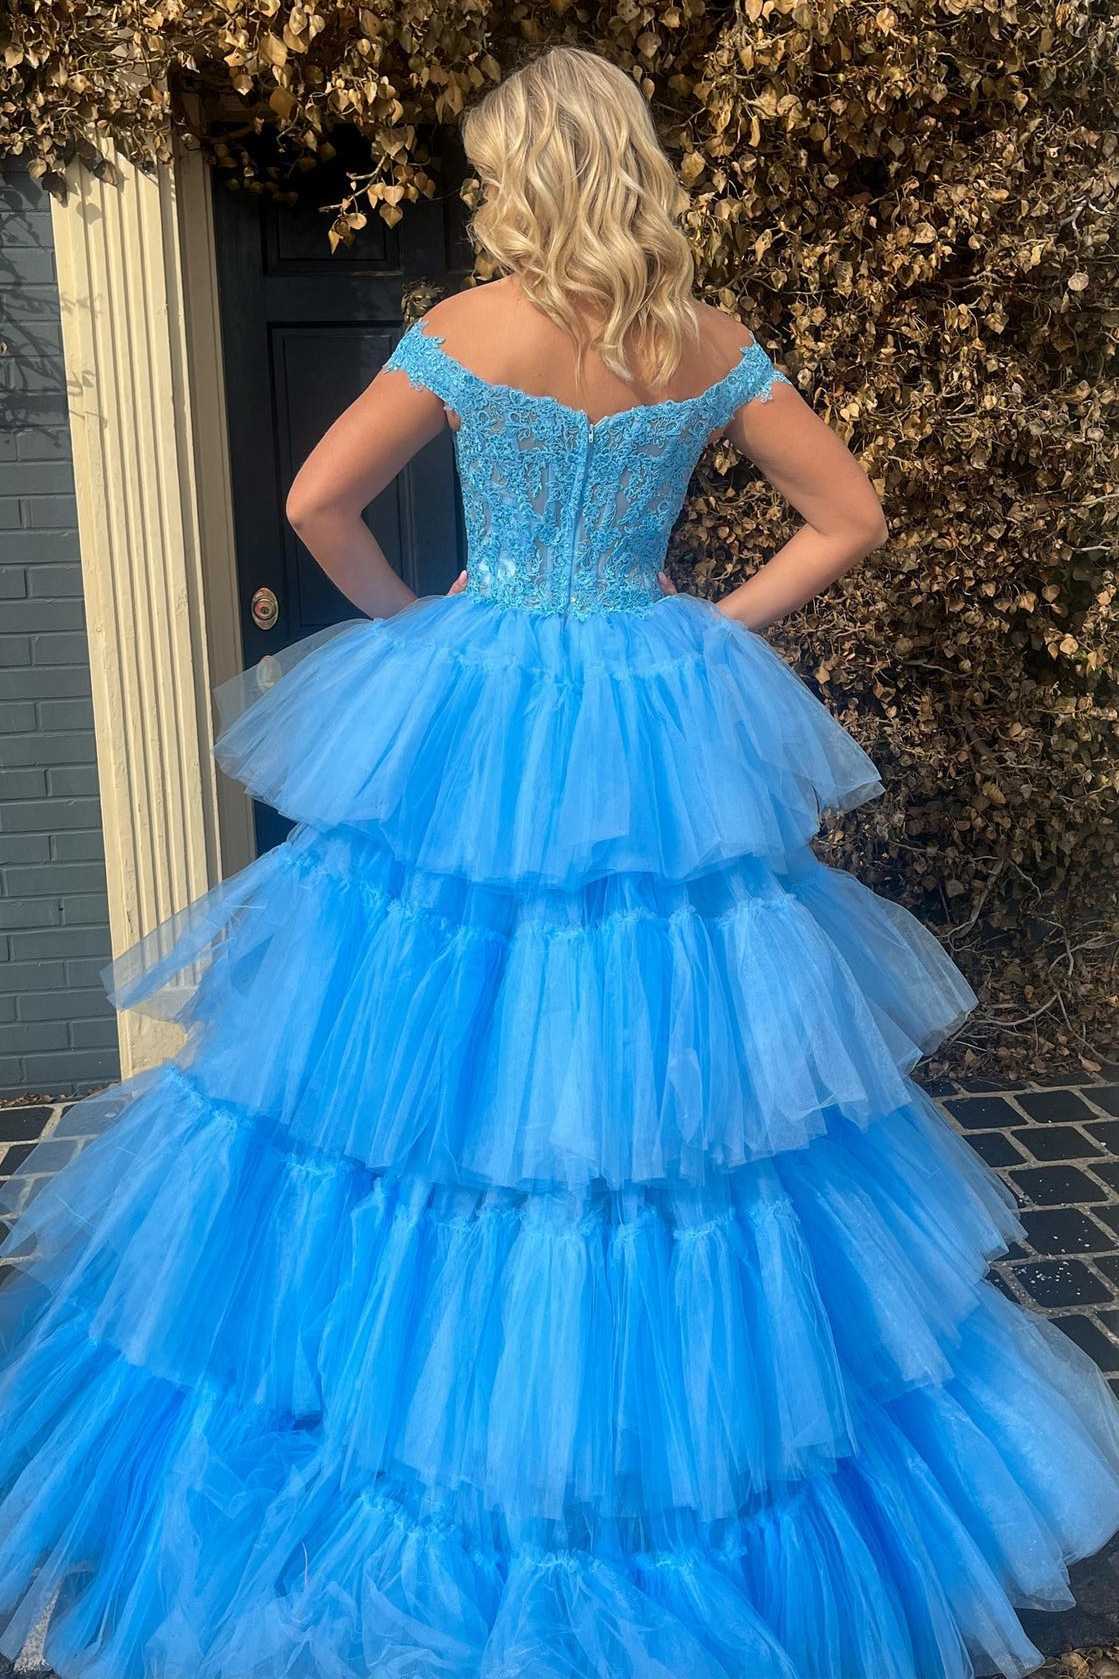 Blue Tulle Lace Off-the-Shoulder High-Low Tiered Prom Dress – Dreamdressy